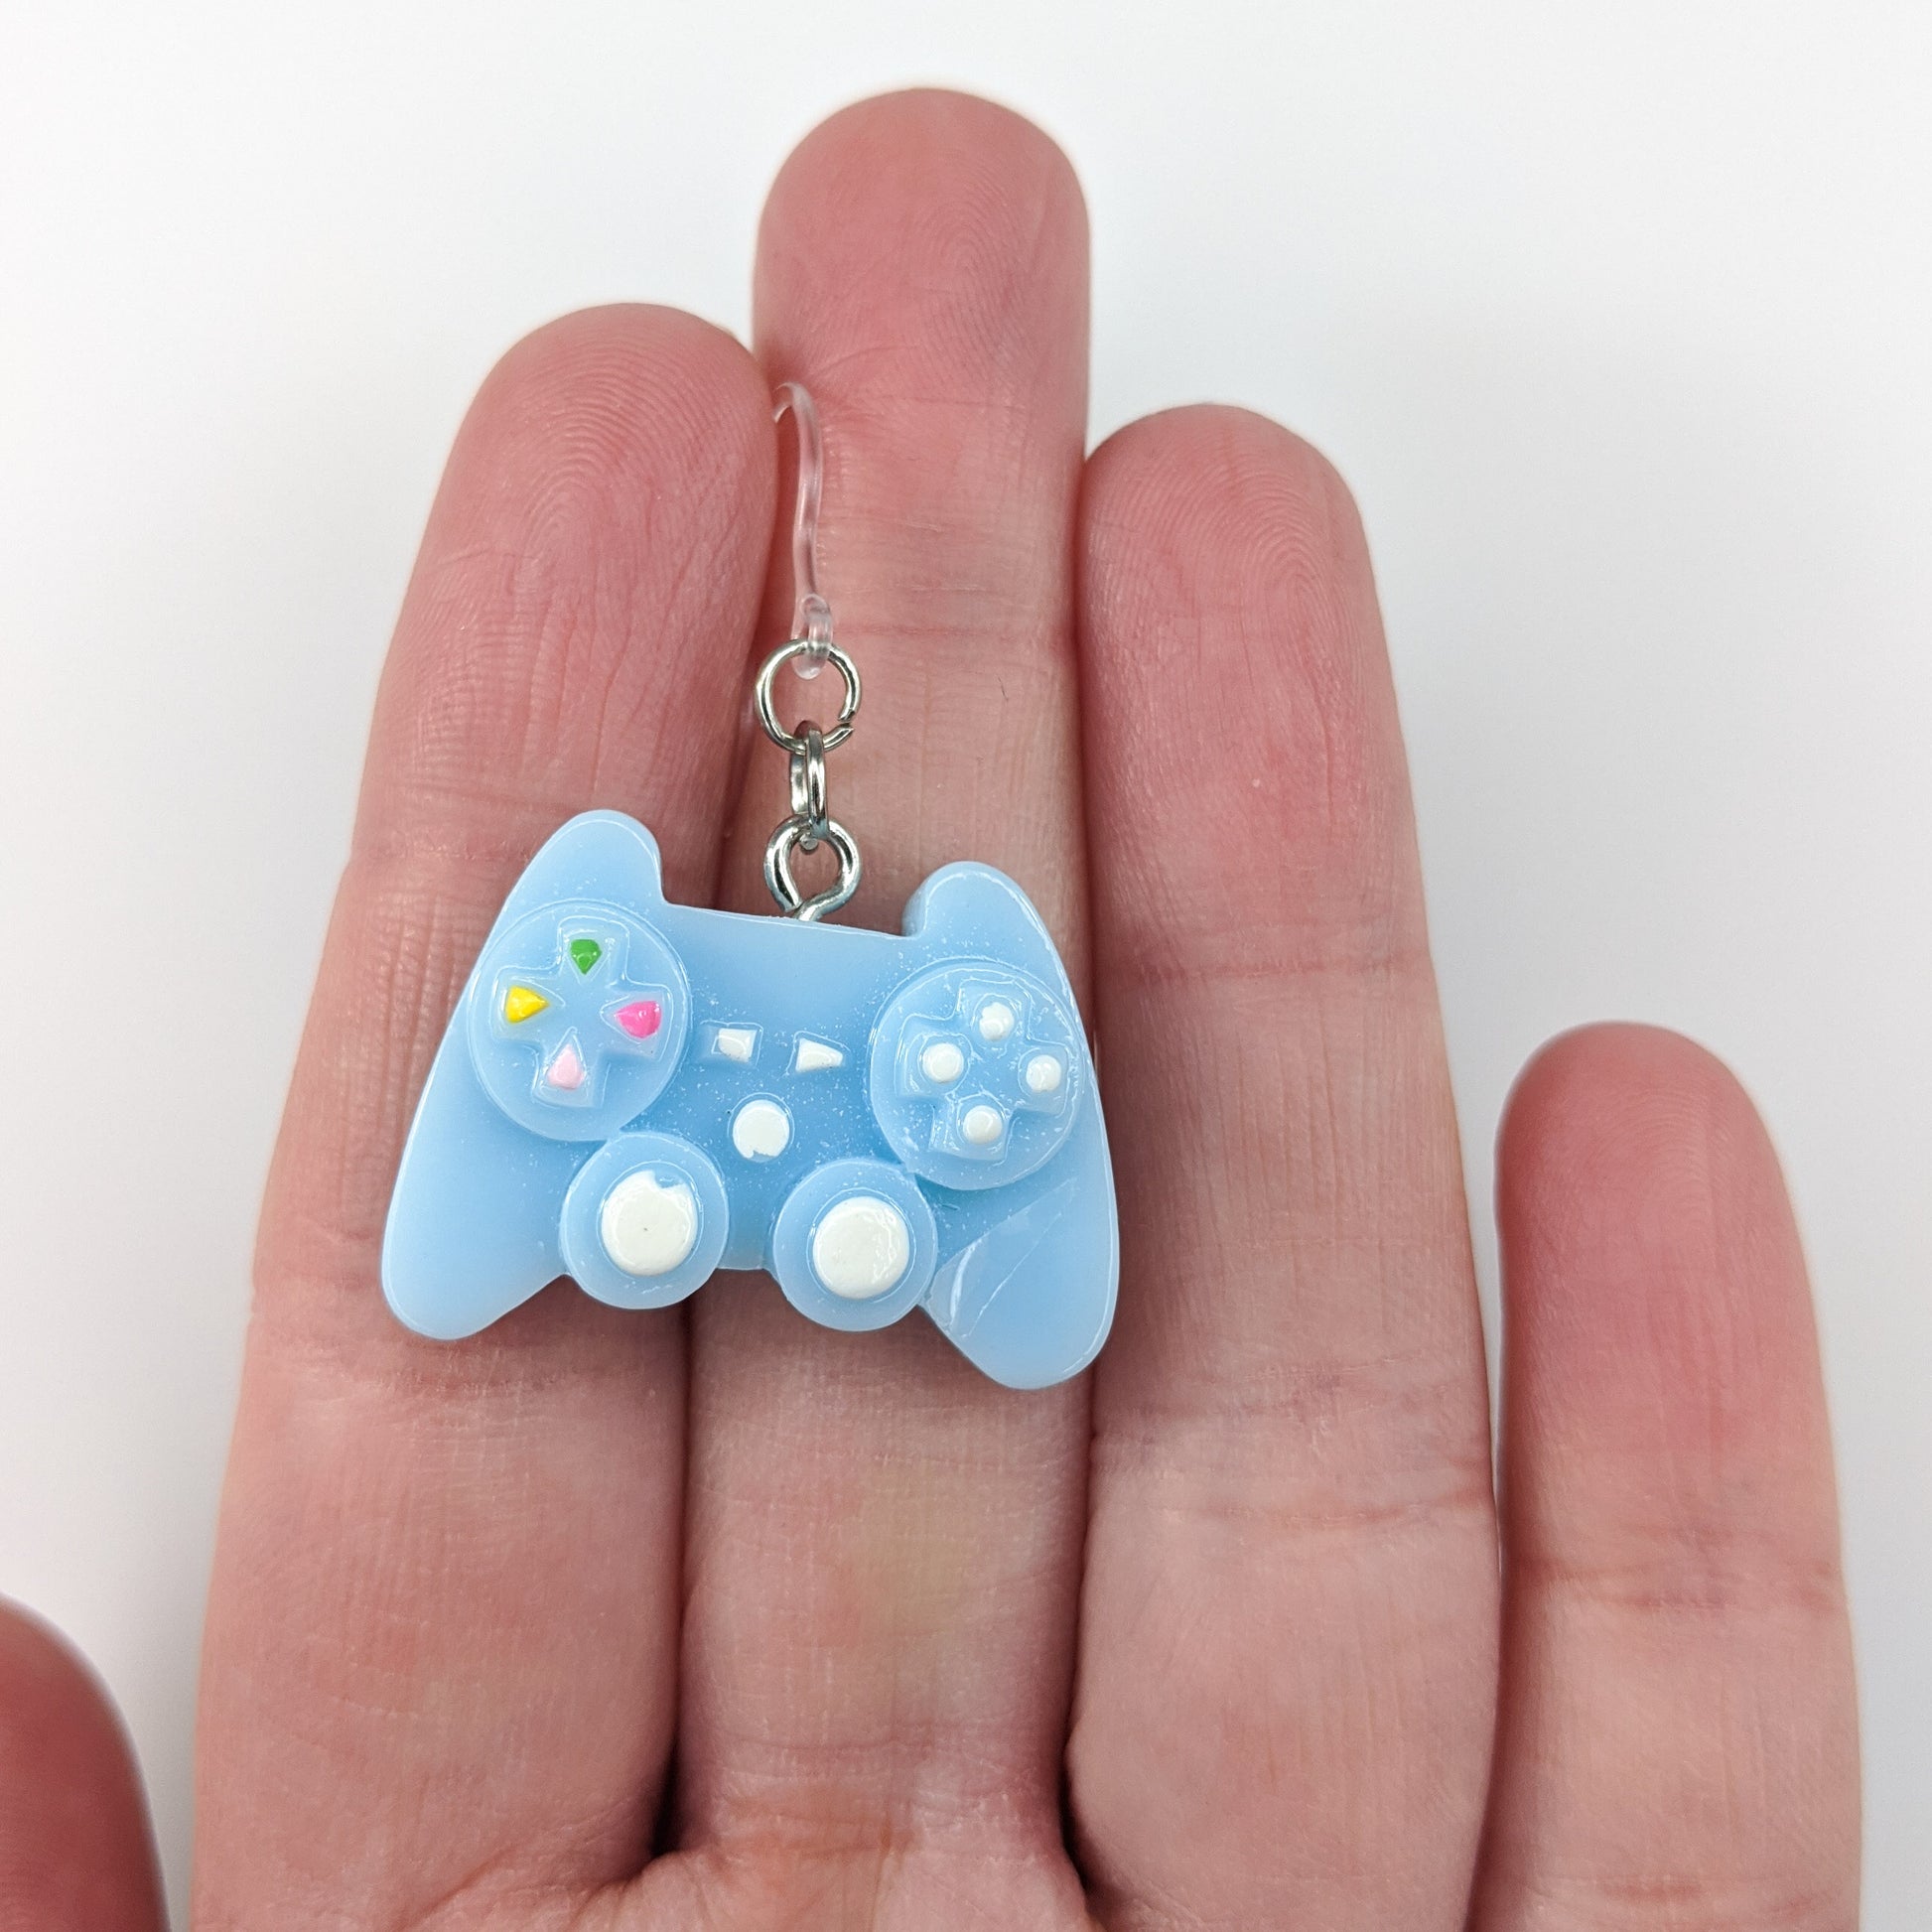 Exaggerated Game Controller Earrings (Dangles) - size comparison hand